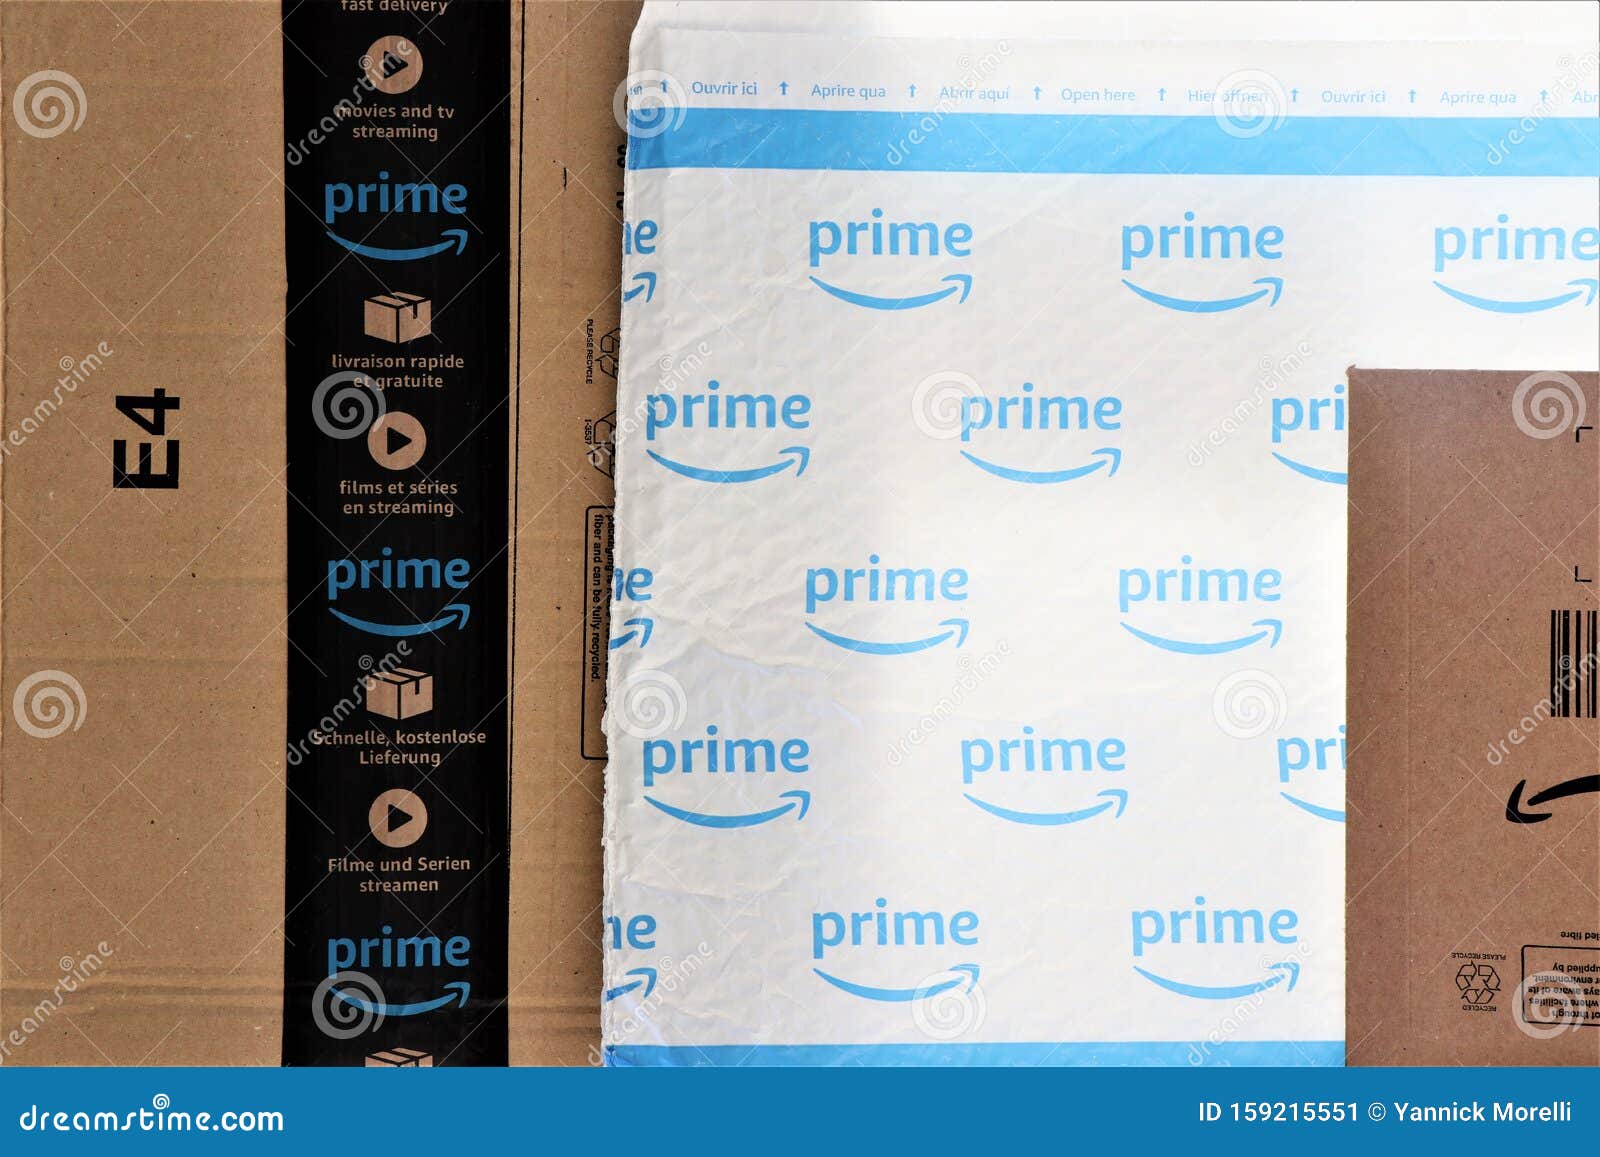 Amazon Packaging Boxes, a Leading Company in the E-commerce Sector